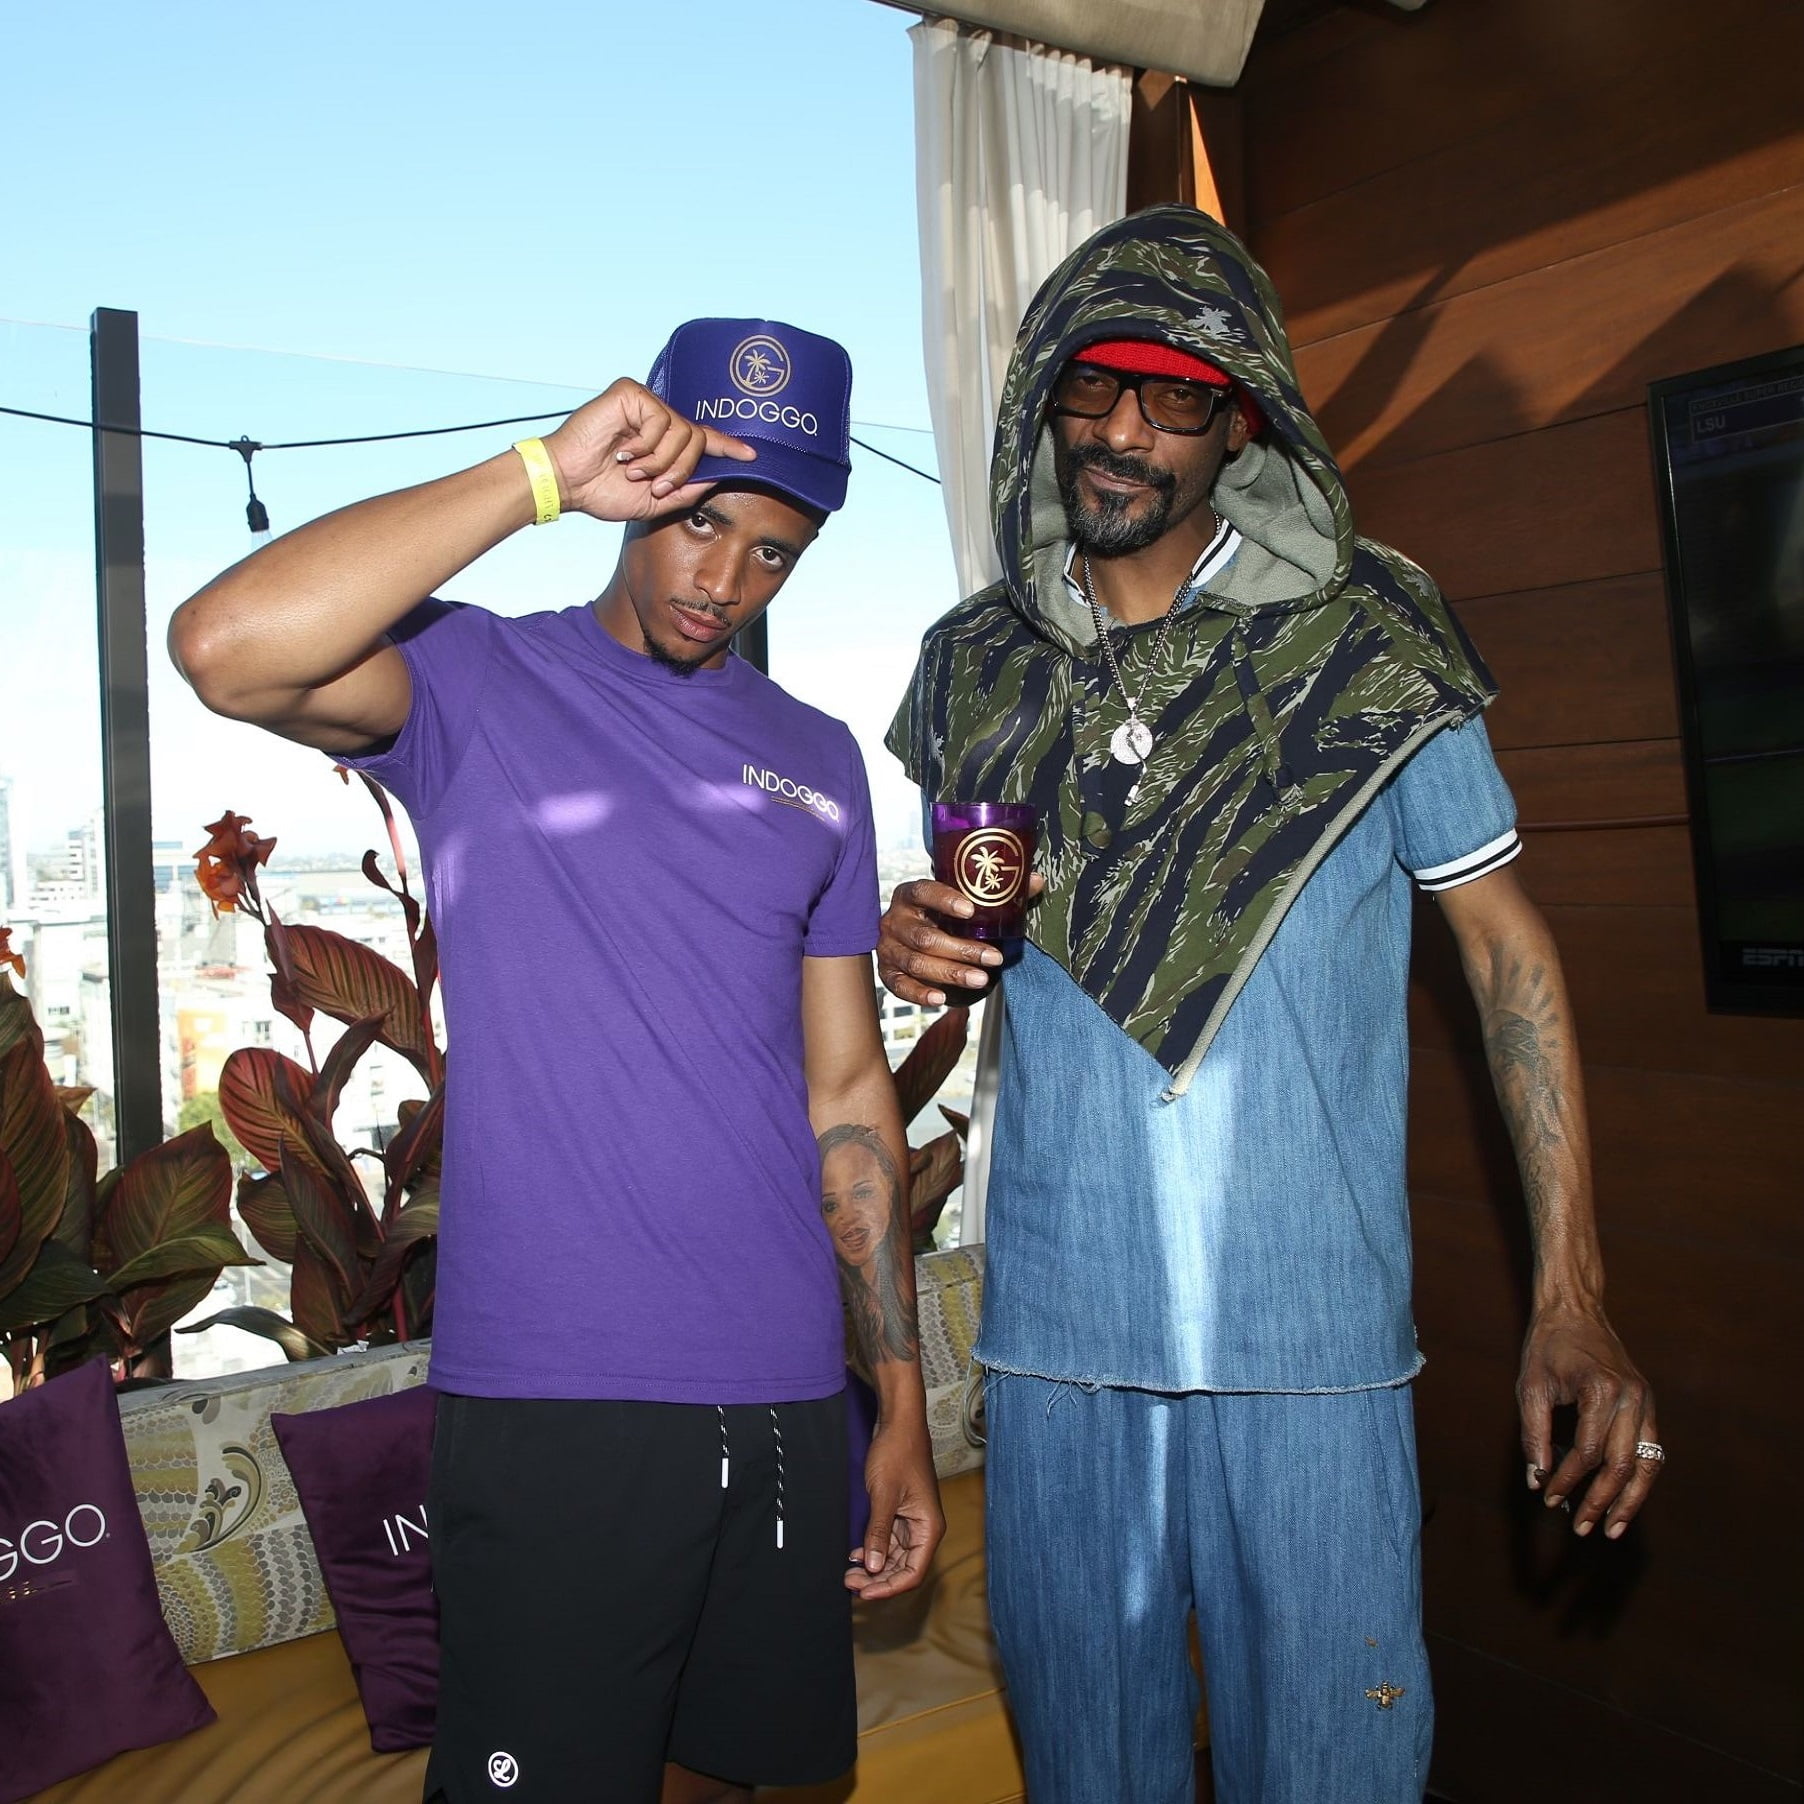 Cordell and Snoop via Fingerprint Communications for use by 360 Magazine